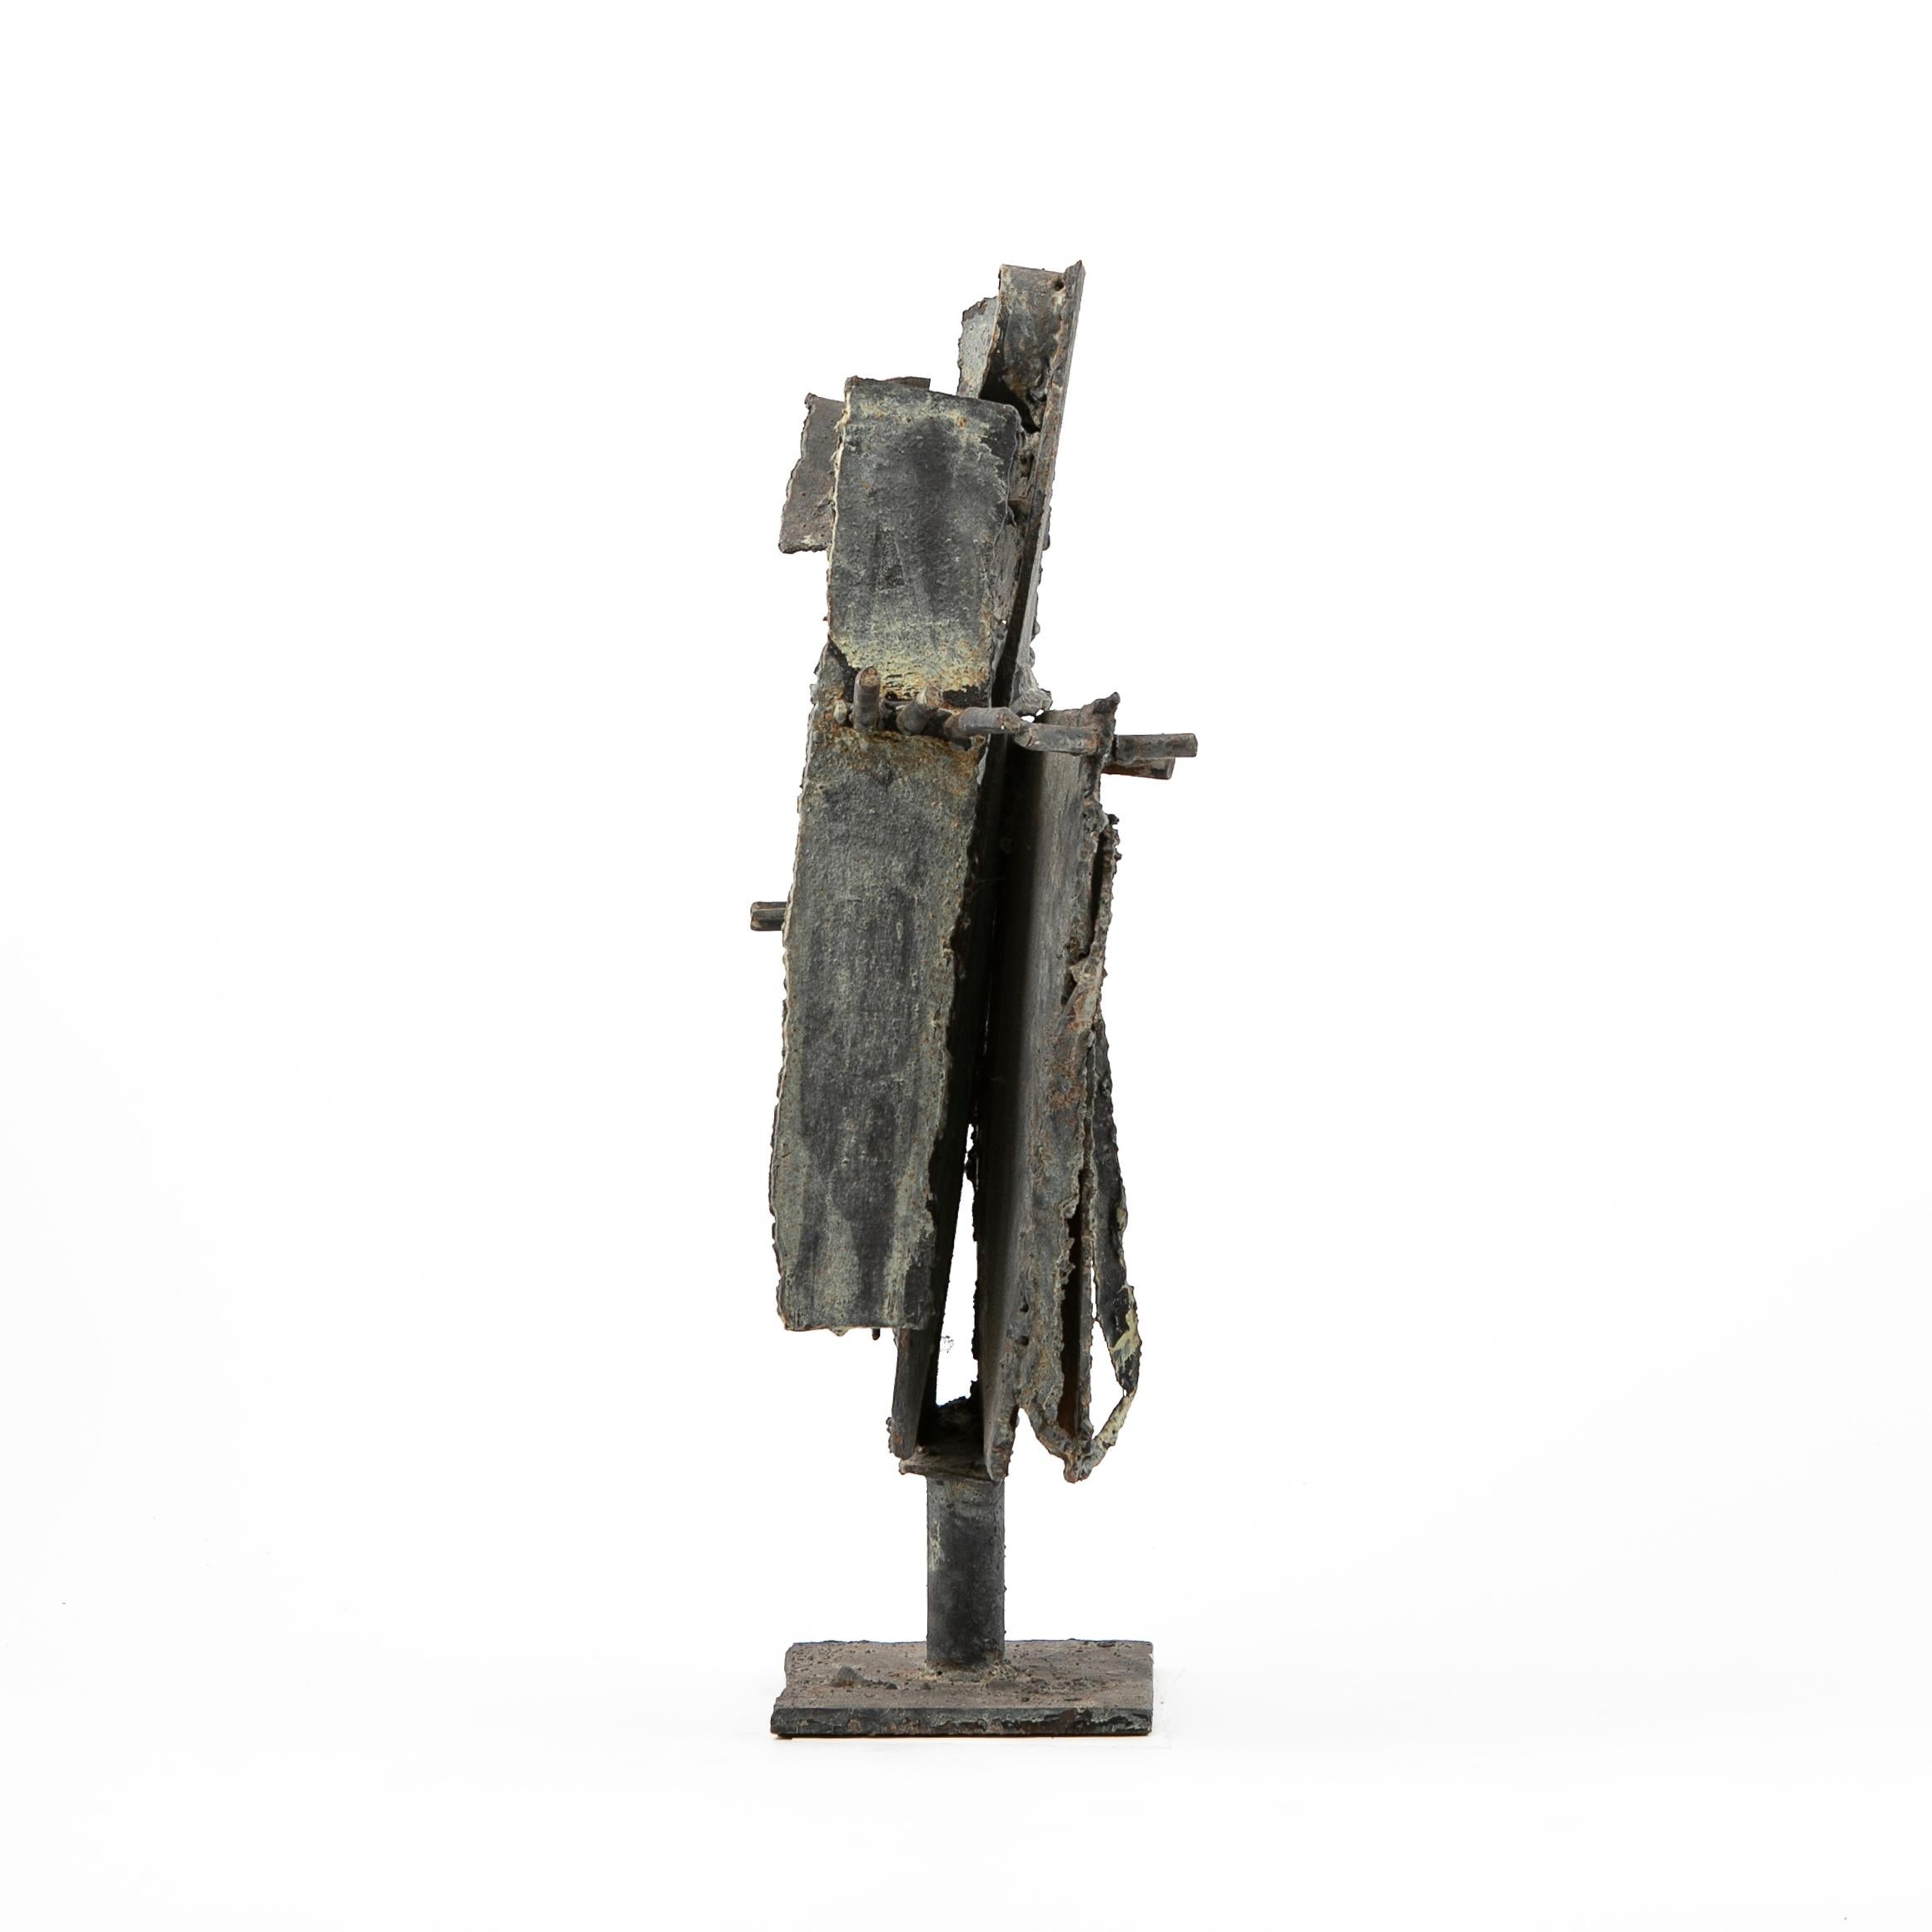 Flemming Rodian Greve (1944-2014).
An abstract sculpture made in patinated iron.
Made in Denmark during the 1960's.
Unsigned.


Flemming Rodian was a Danish renowned Postwar & Contemporary artist who worked with both prints, sculpting and